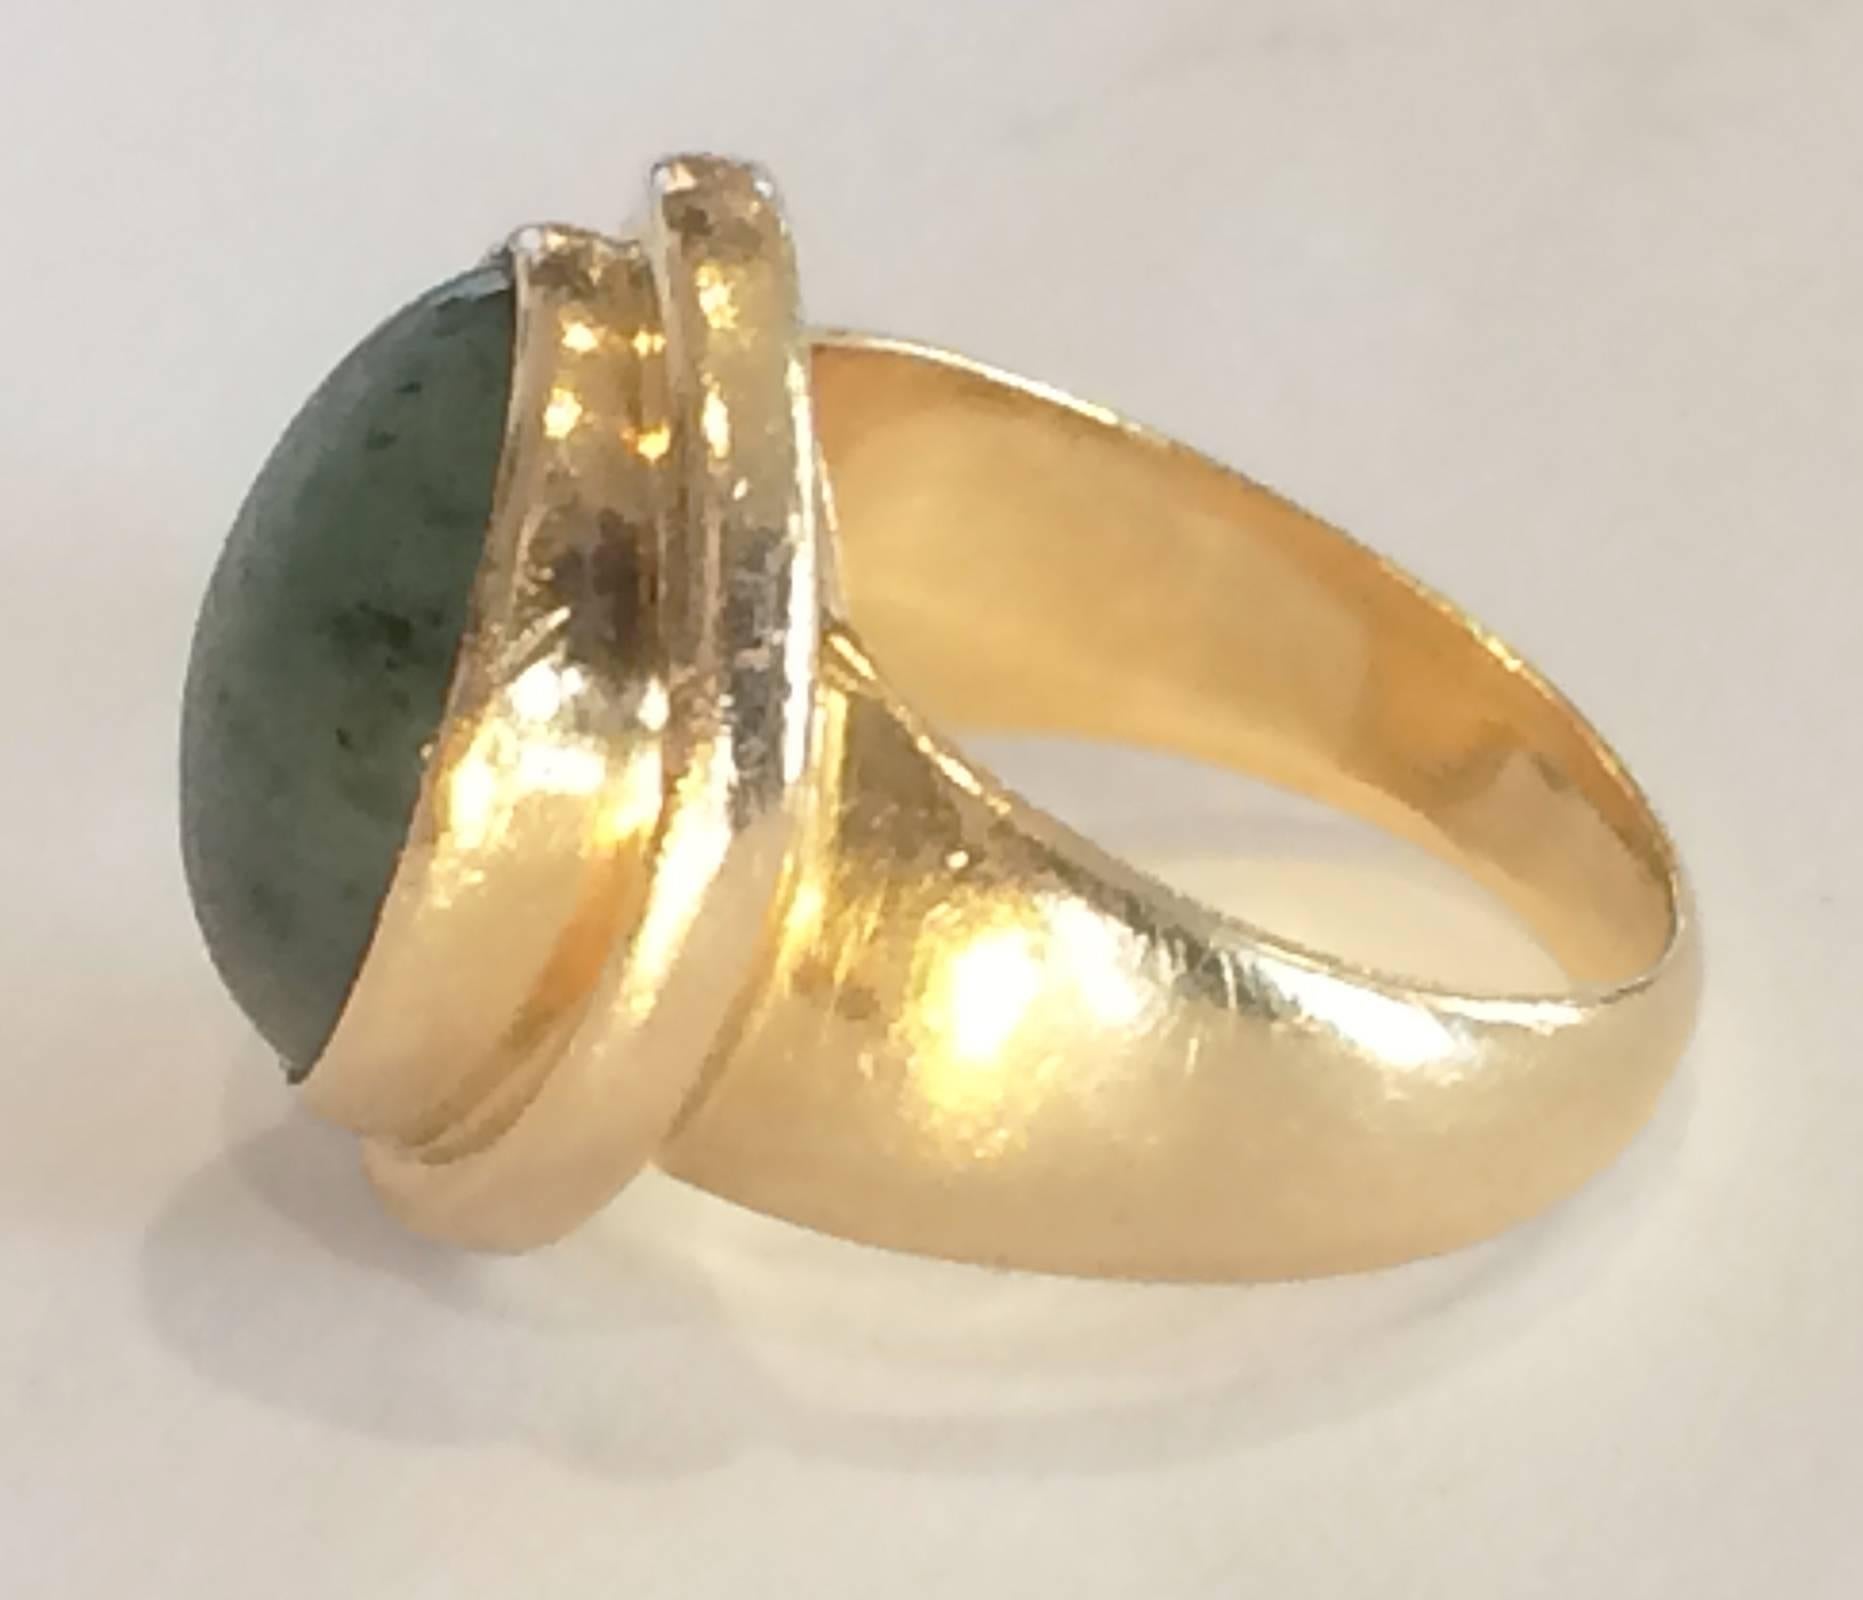 A rare Art Deco Ring by Georg Jensen, in 18ct (750 European Mark), with Nephrite Jade Cabochon set in a full perimeter mount (Design Shape No. 1046). . The primary Hallmarks to the inside, behind the mount, are as follows: The standard Georg Jensen 